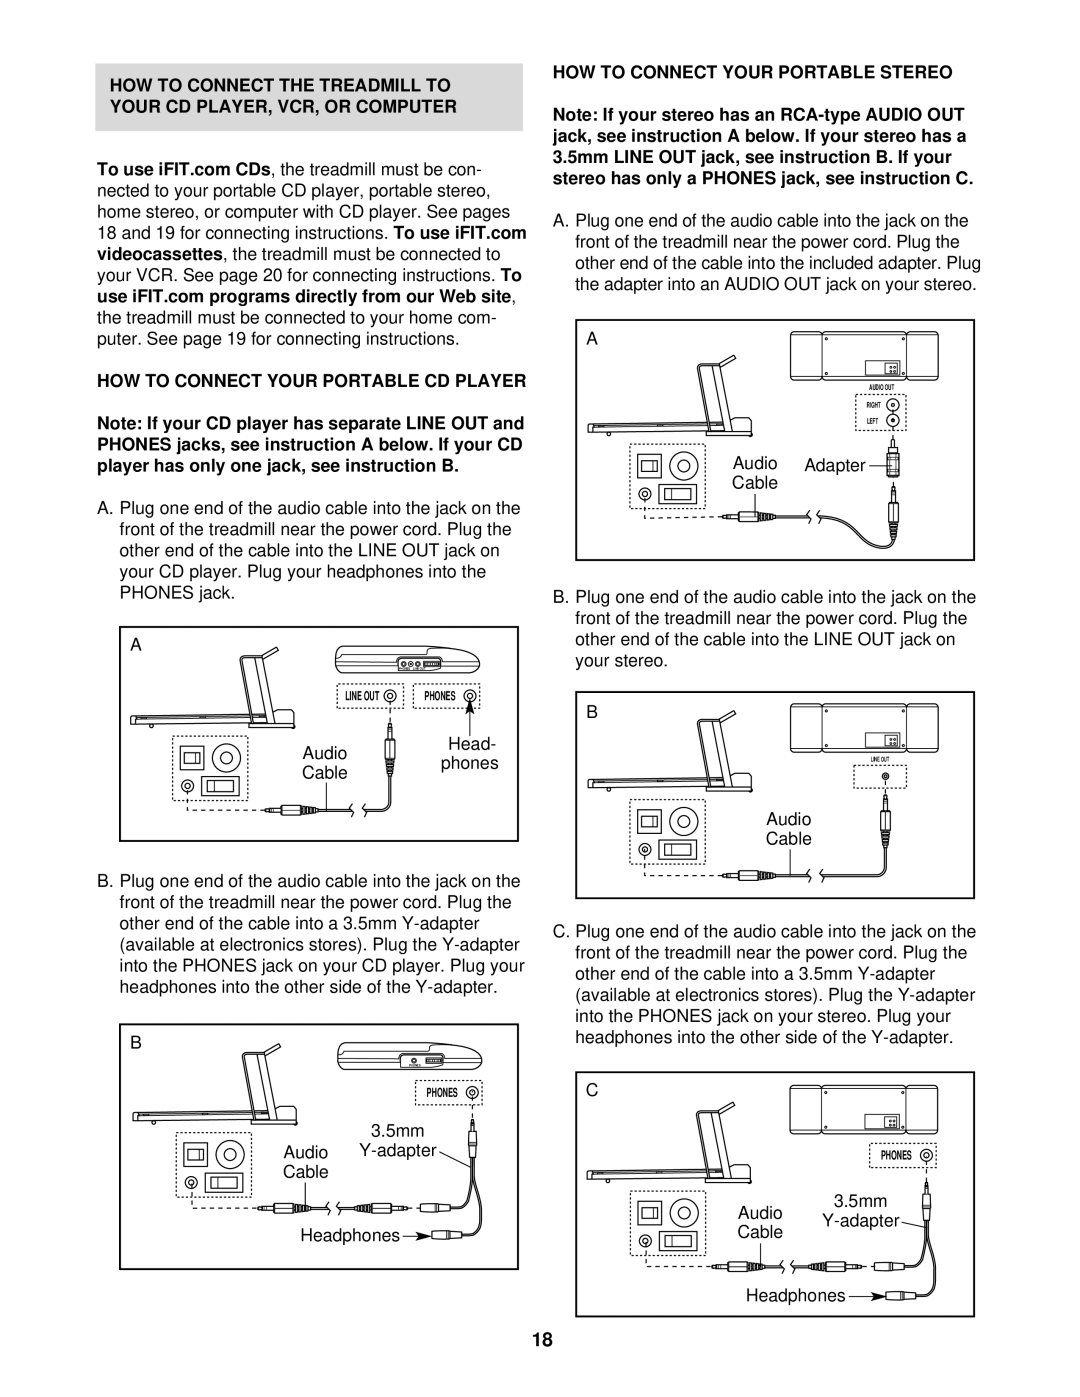 ProForm PFTL14920 user manual HOW to Connect Your Portable Stereo 